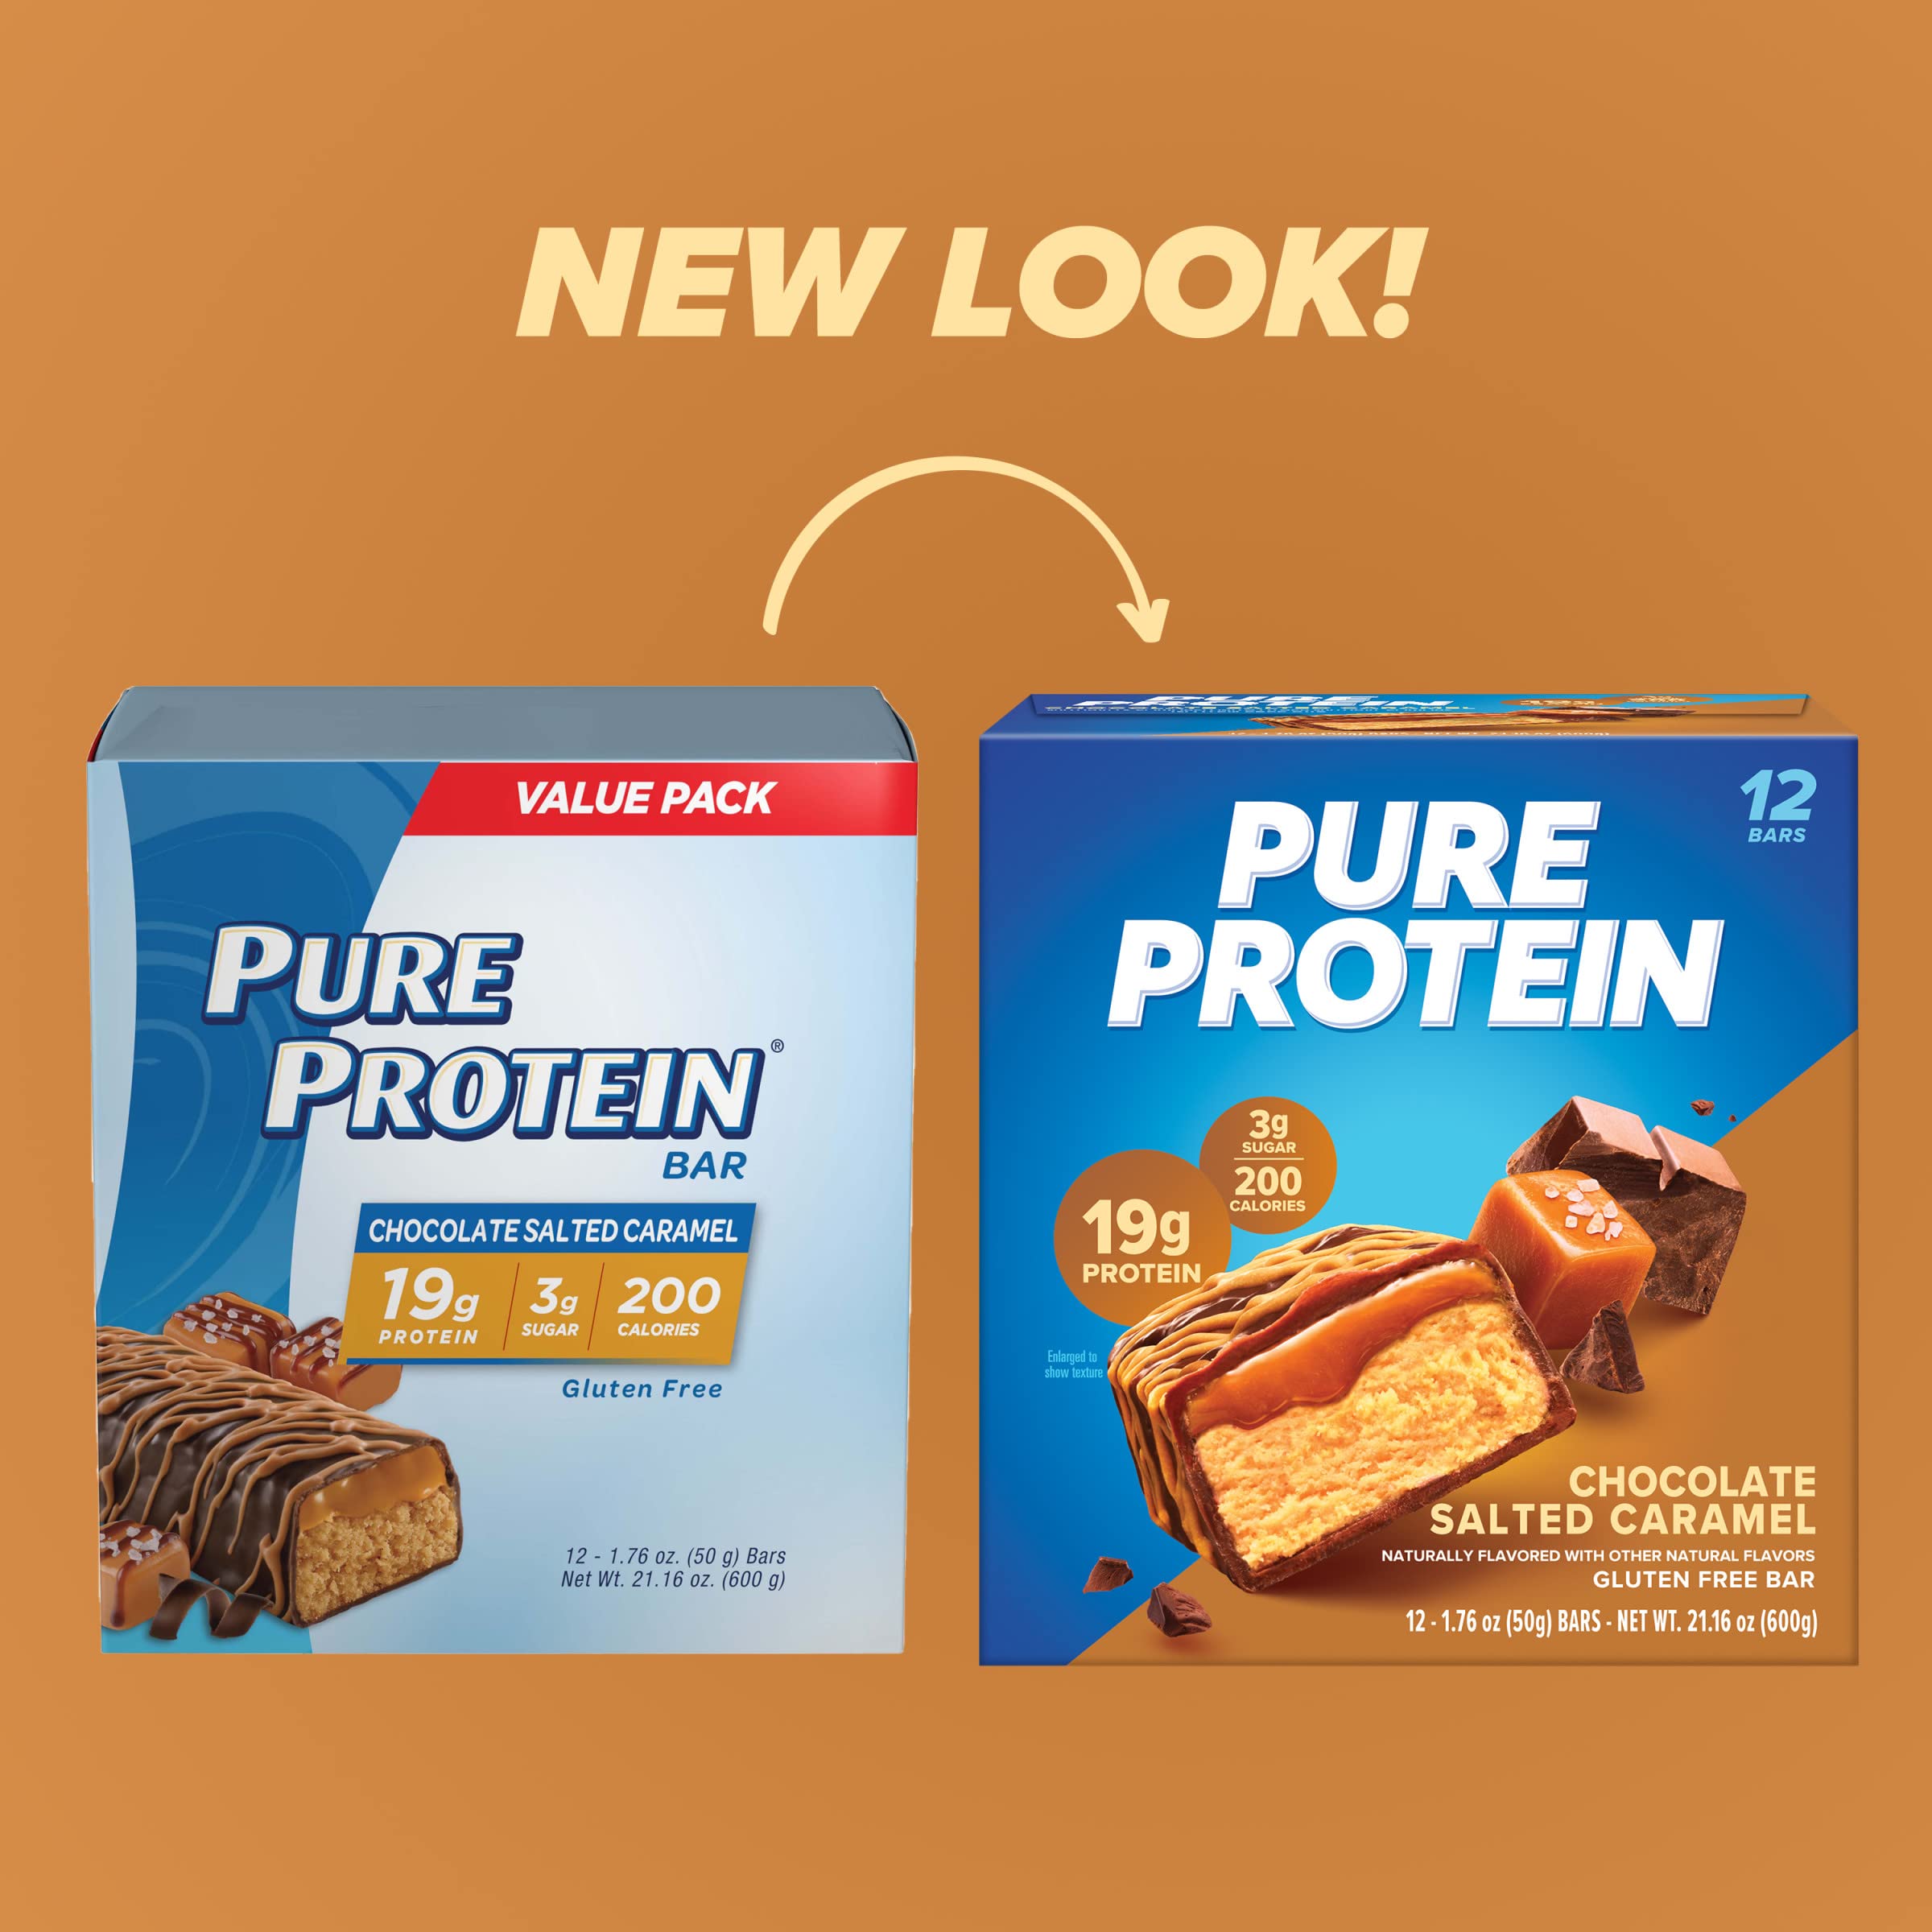 Pure Protein Bars, High Protein, Nutritious Snacks to Support Energy, Low Sugar & Bars, High Protein, Nutritious Snacks to Support Energy, Low Sugar, Gluten Free